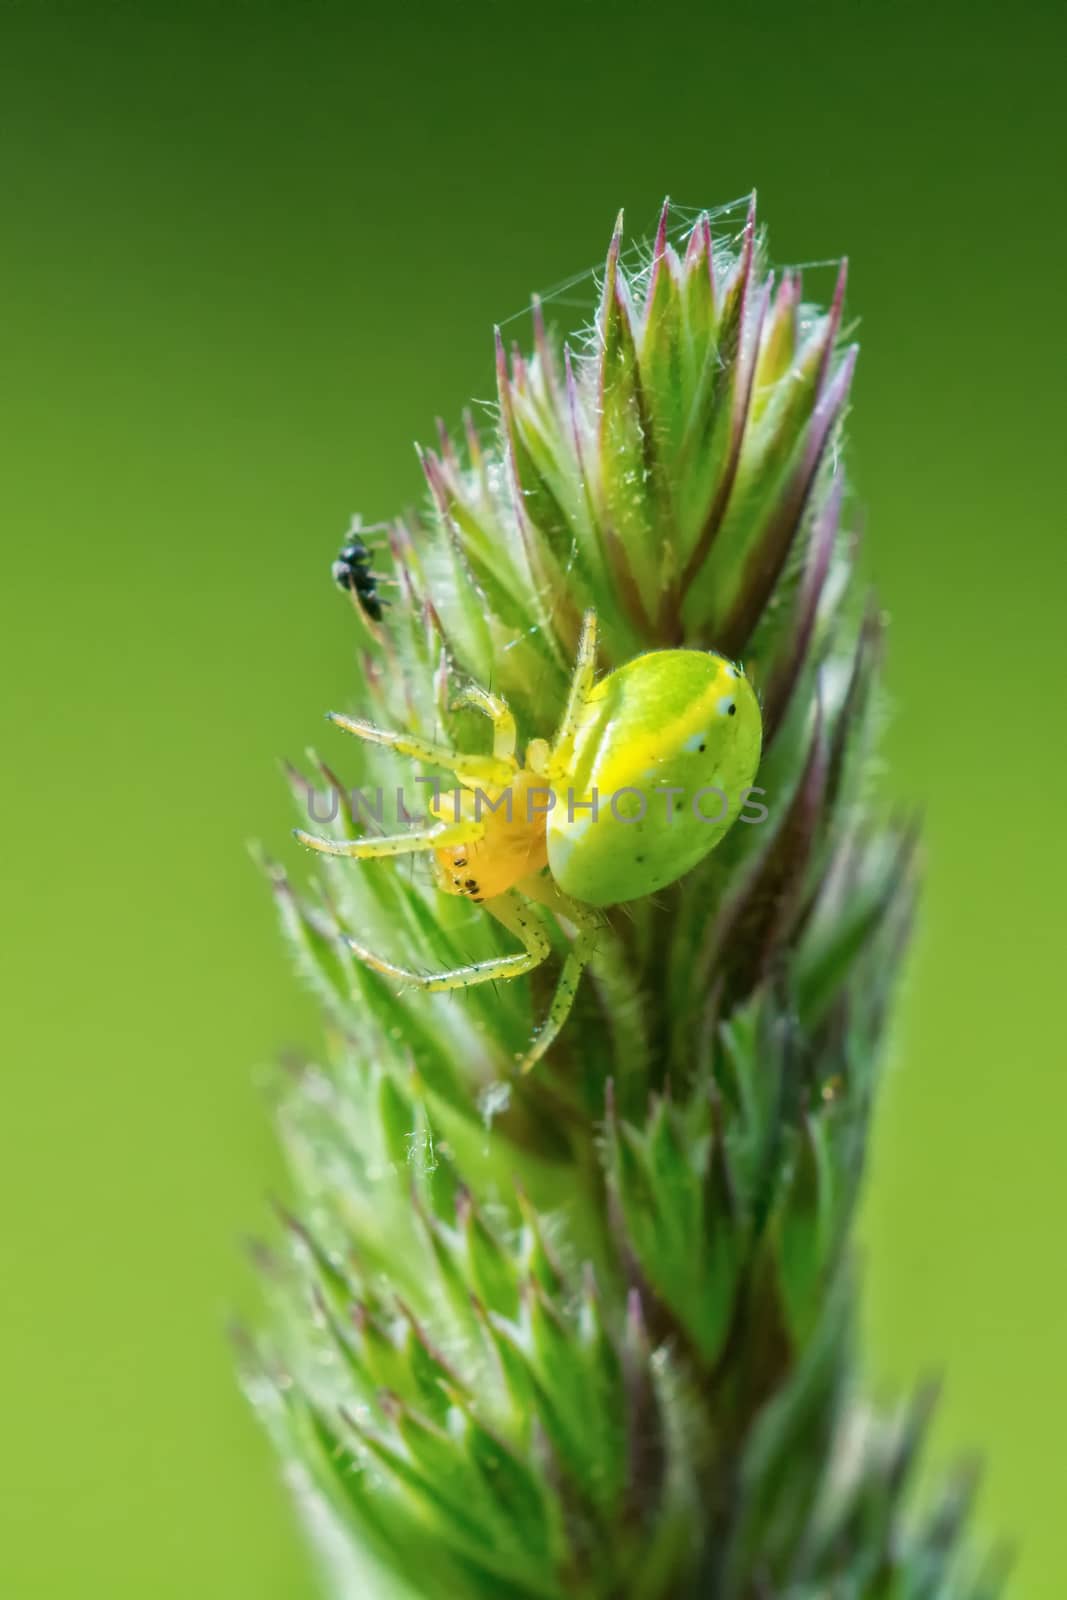 Green spider on a flower with green background by neryx